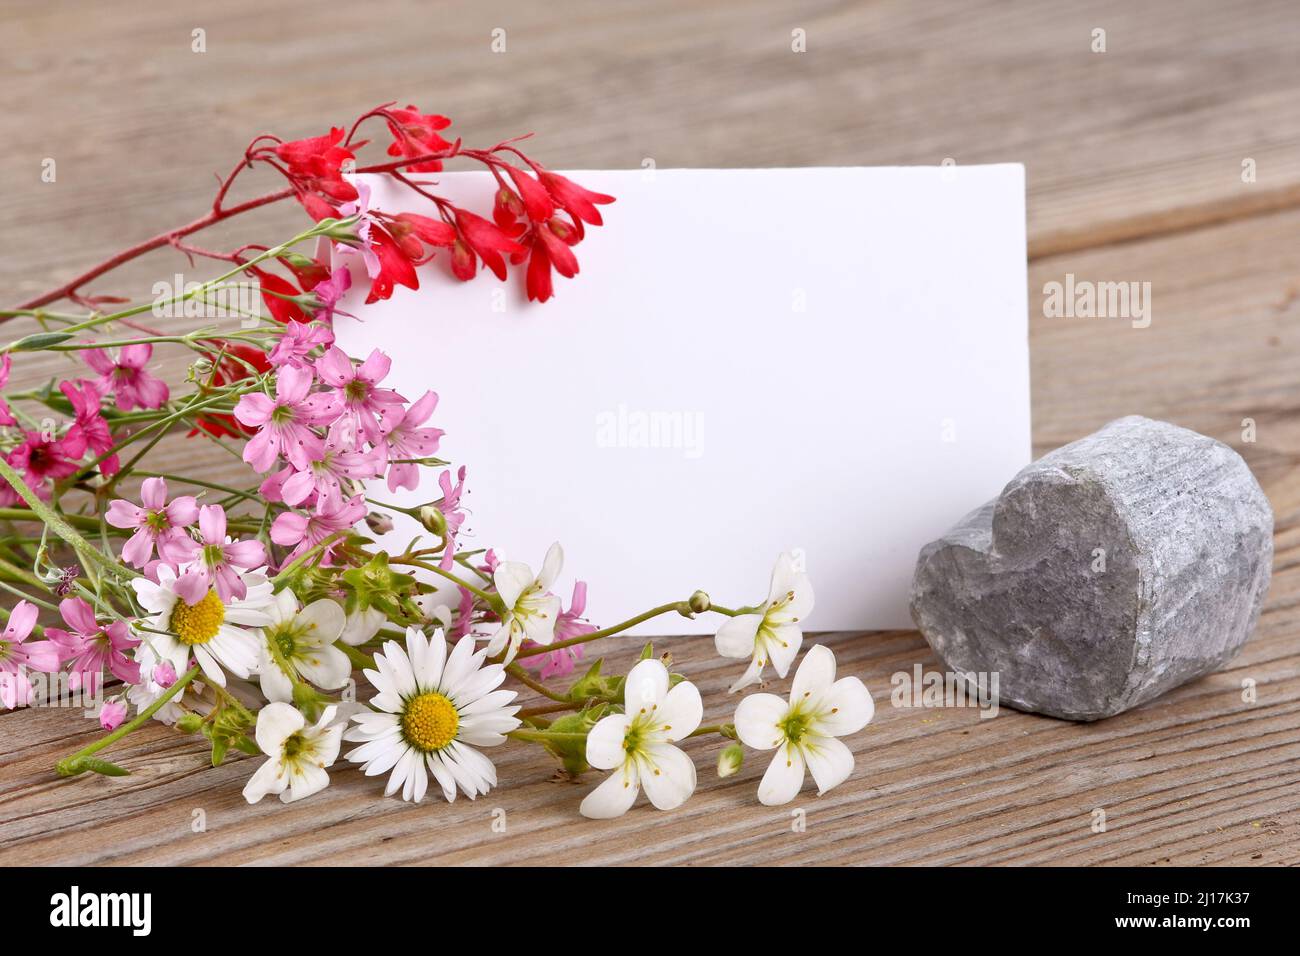 Heart-shaped stone with a small bouquet of flowers Stock Photo